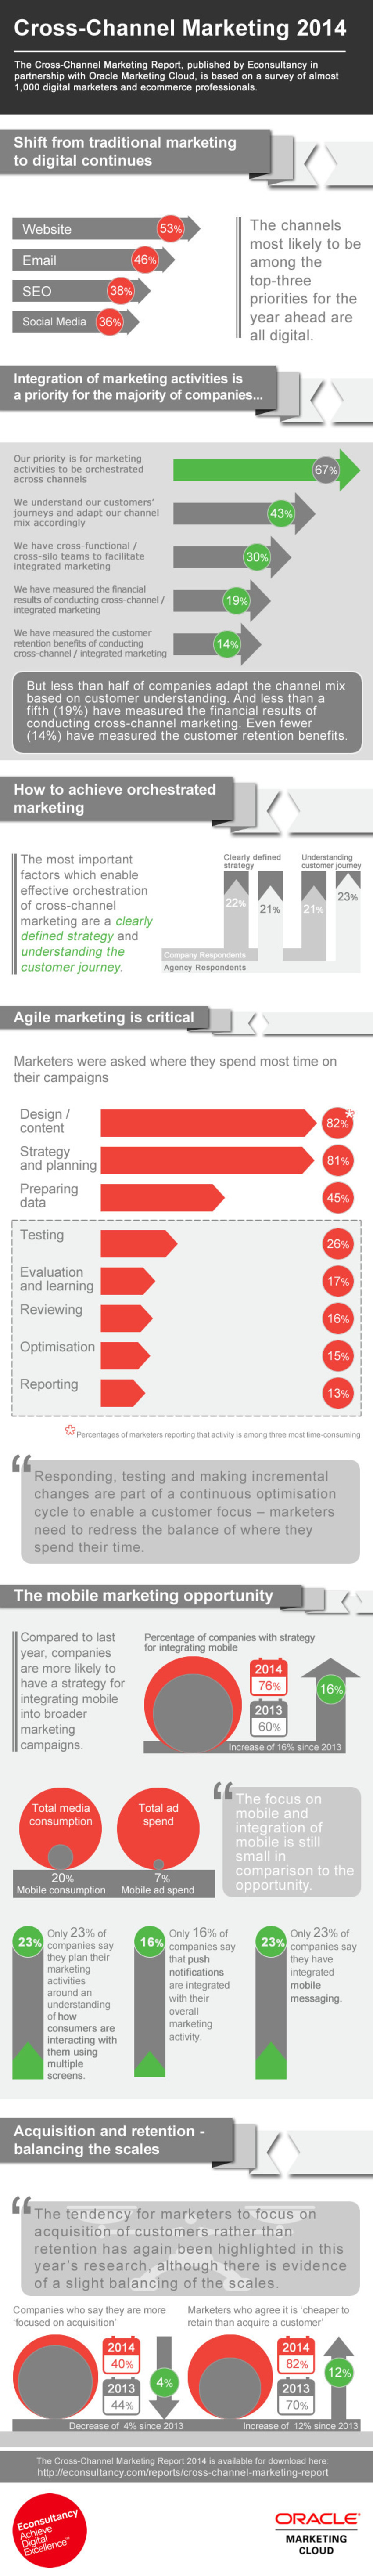 Cross-channel marketing 2014: trends & opportunities [infographic] - Econsultancy | The MarTech Digest | Scoop.it